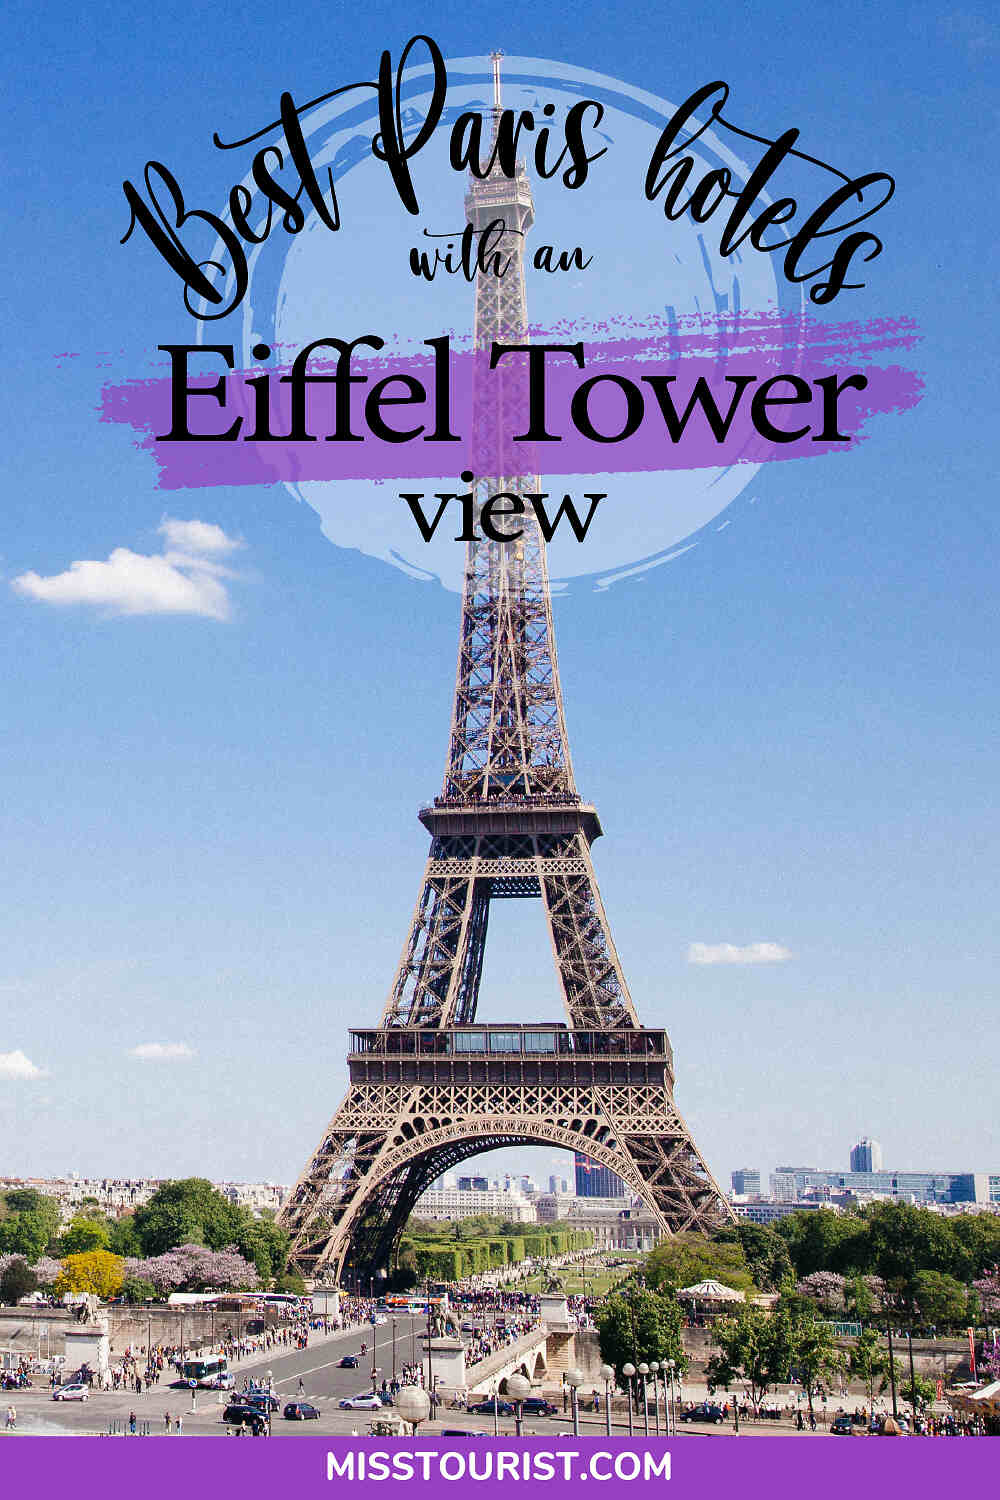 Paris hotel with Eiffel Tower view PIN 4